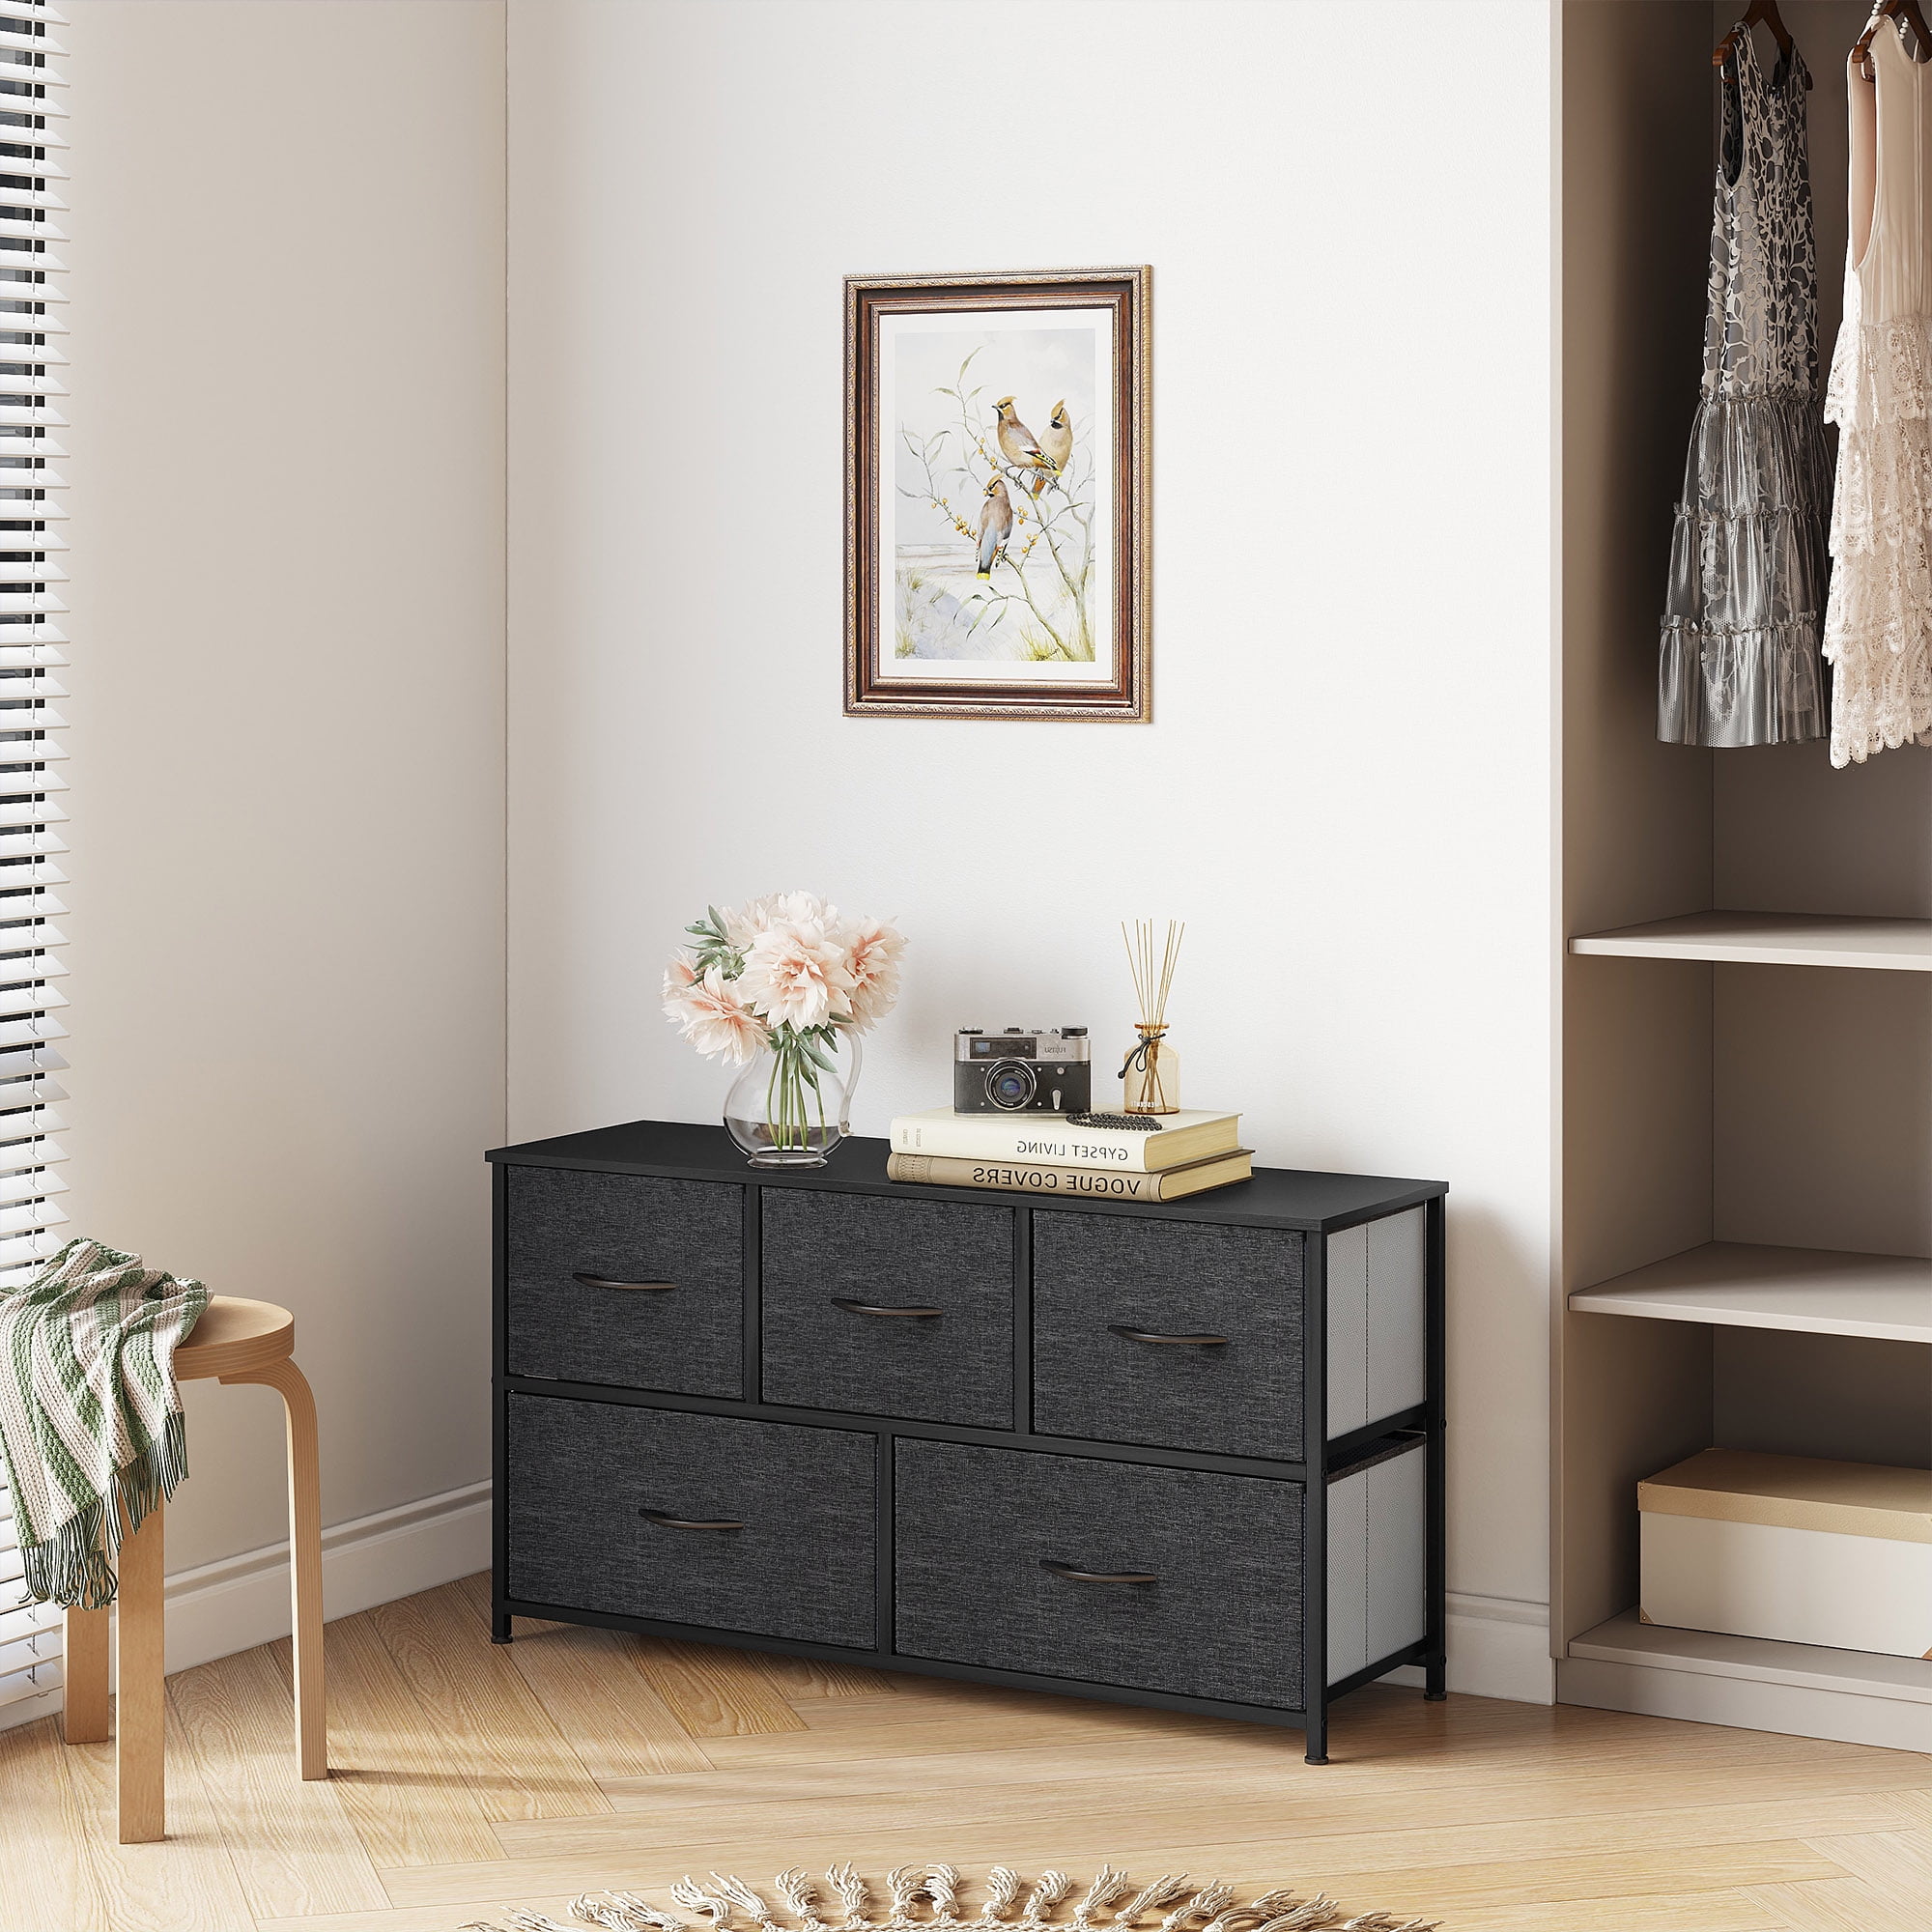 Crestlive Products 5-Drawers Storage Drawers with Wood Shelf Handle at the  best price of 69.99